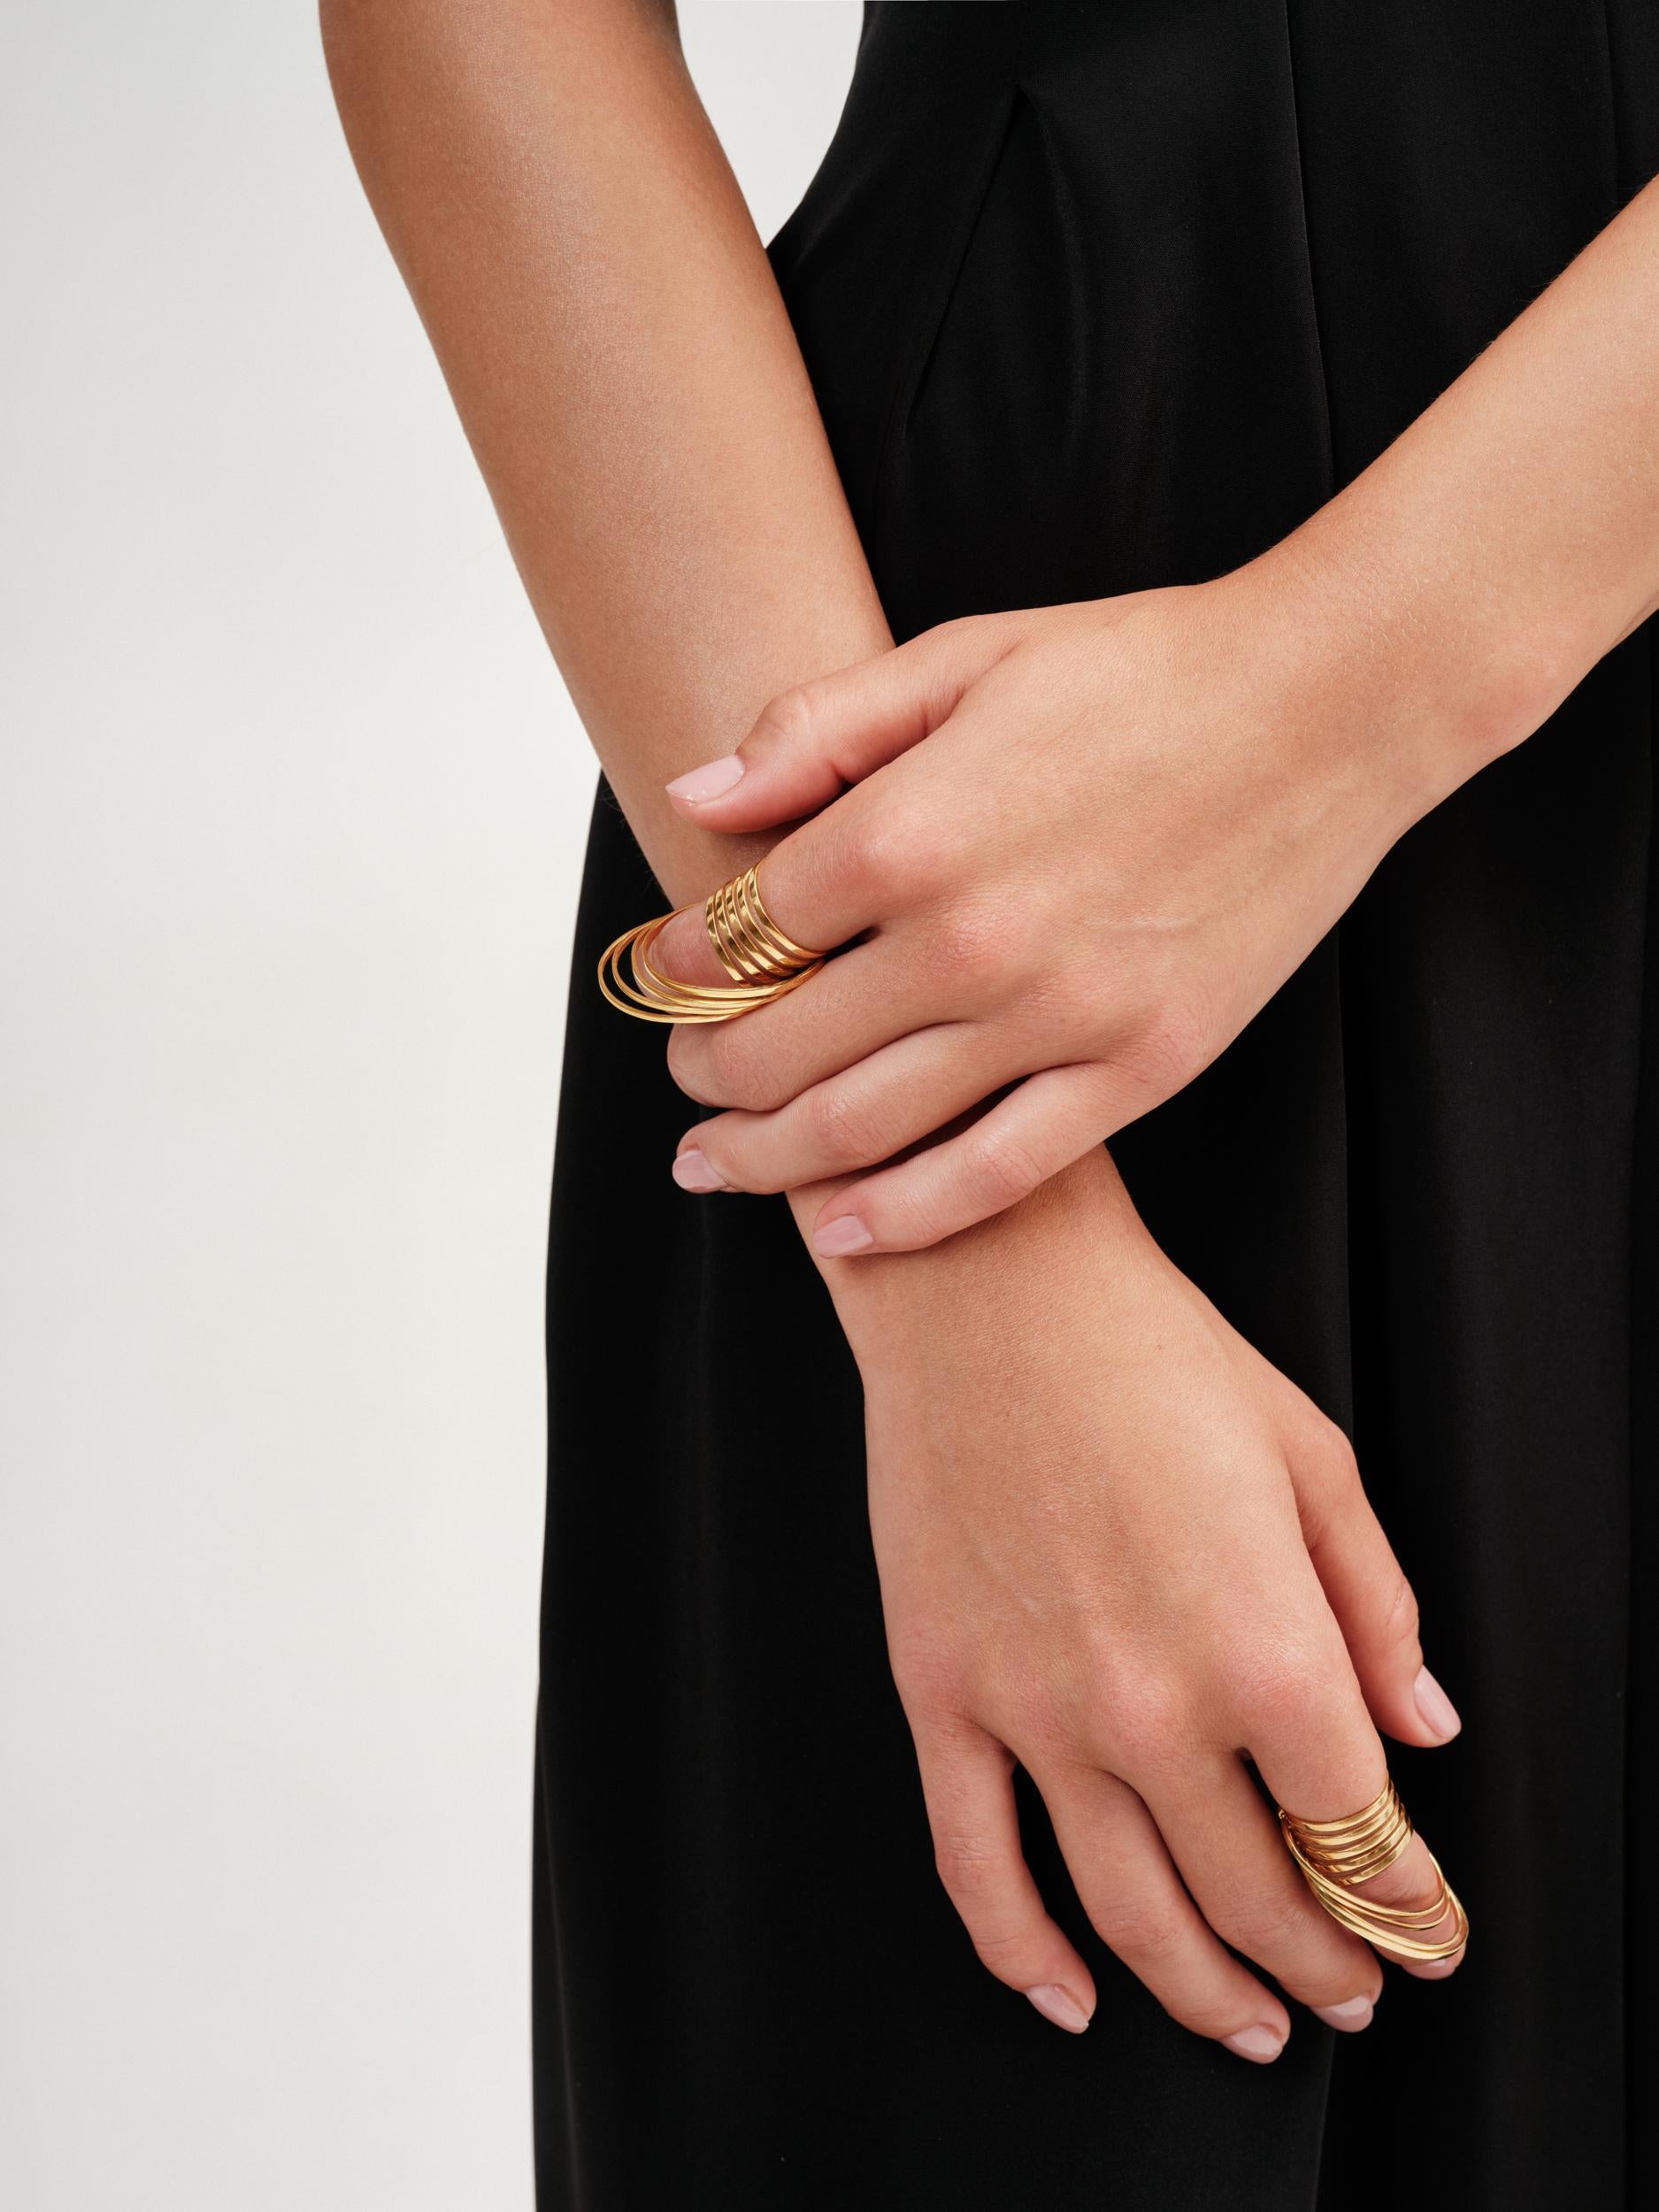 Full Moon Ring

Theodora D's unique handcrafted Full Moon statement Ring from the Full Moon collection is based on circular forms reflecting the light and grace of the full moon. 
Created with full movement, designed to accentuate the elegant female